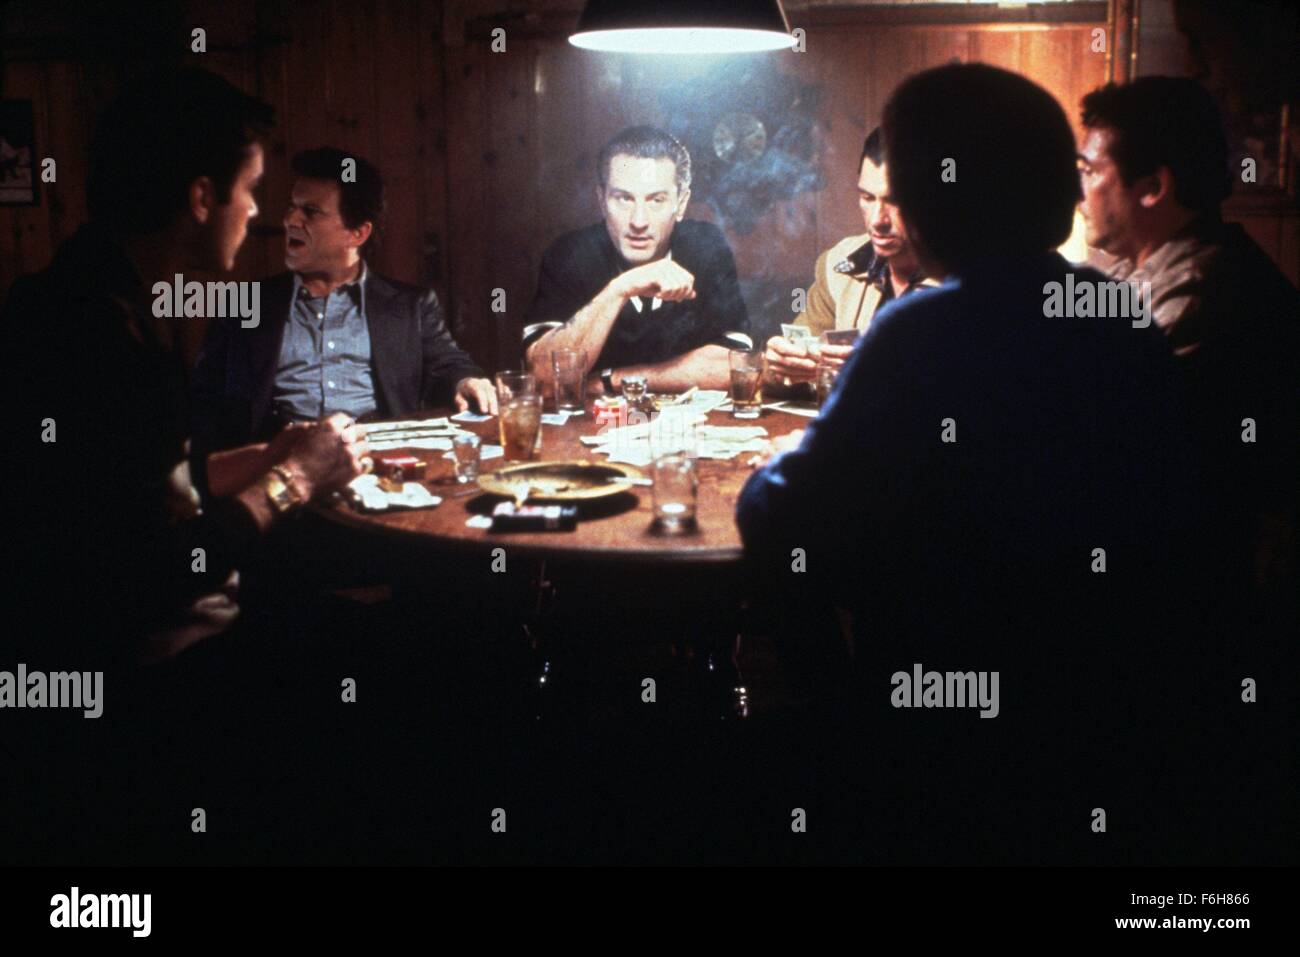 RELEASE DATE: September 19, 1990   MOVIE TITLE: Goodfellas   STUDIO: CBS   DIRECTOR: Martin Scorsese  PLOT: The story of Irish-Italian American, Henry Hill, and how he lives day-to-day life as a member of the Mafia. Based on a true story, the plot revolves around Henry and his two unstable friends Jimmy and Tommy as they gradually climb the ladder from petty crime to violent murders.   PICTURED: ROBERT DE NIRO as James Conway.   (Credit Image: c Warner Bros. Pictures/Entertainment Pictures) Stock Photo